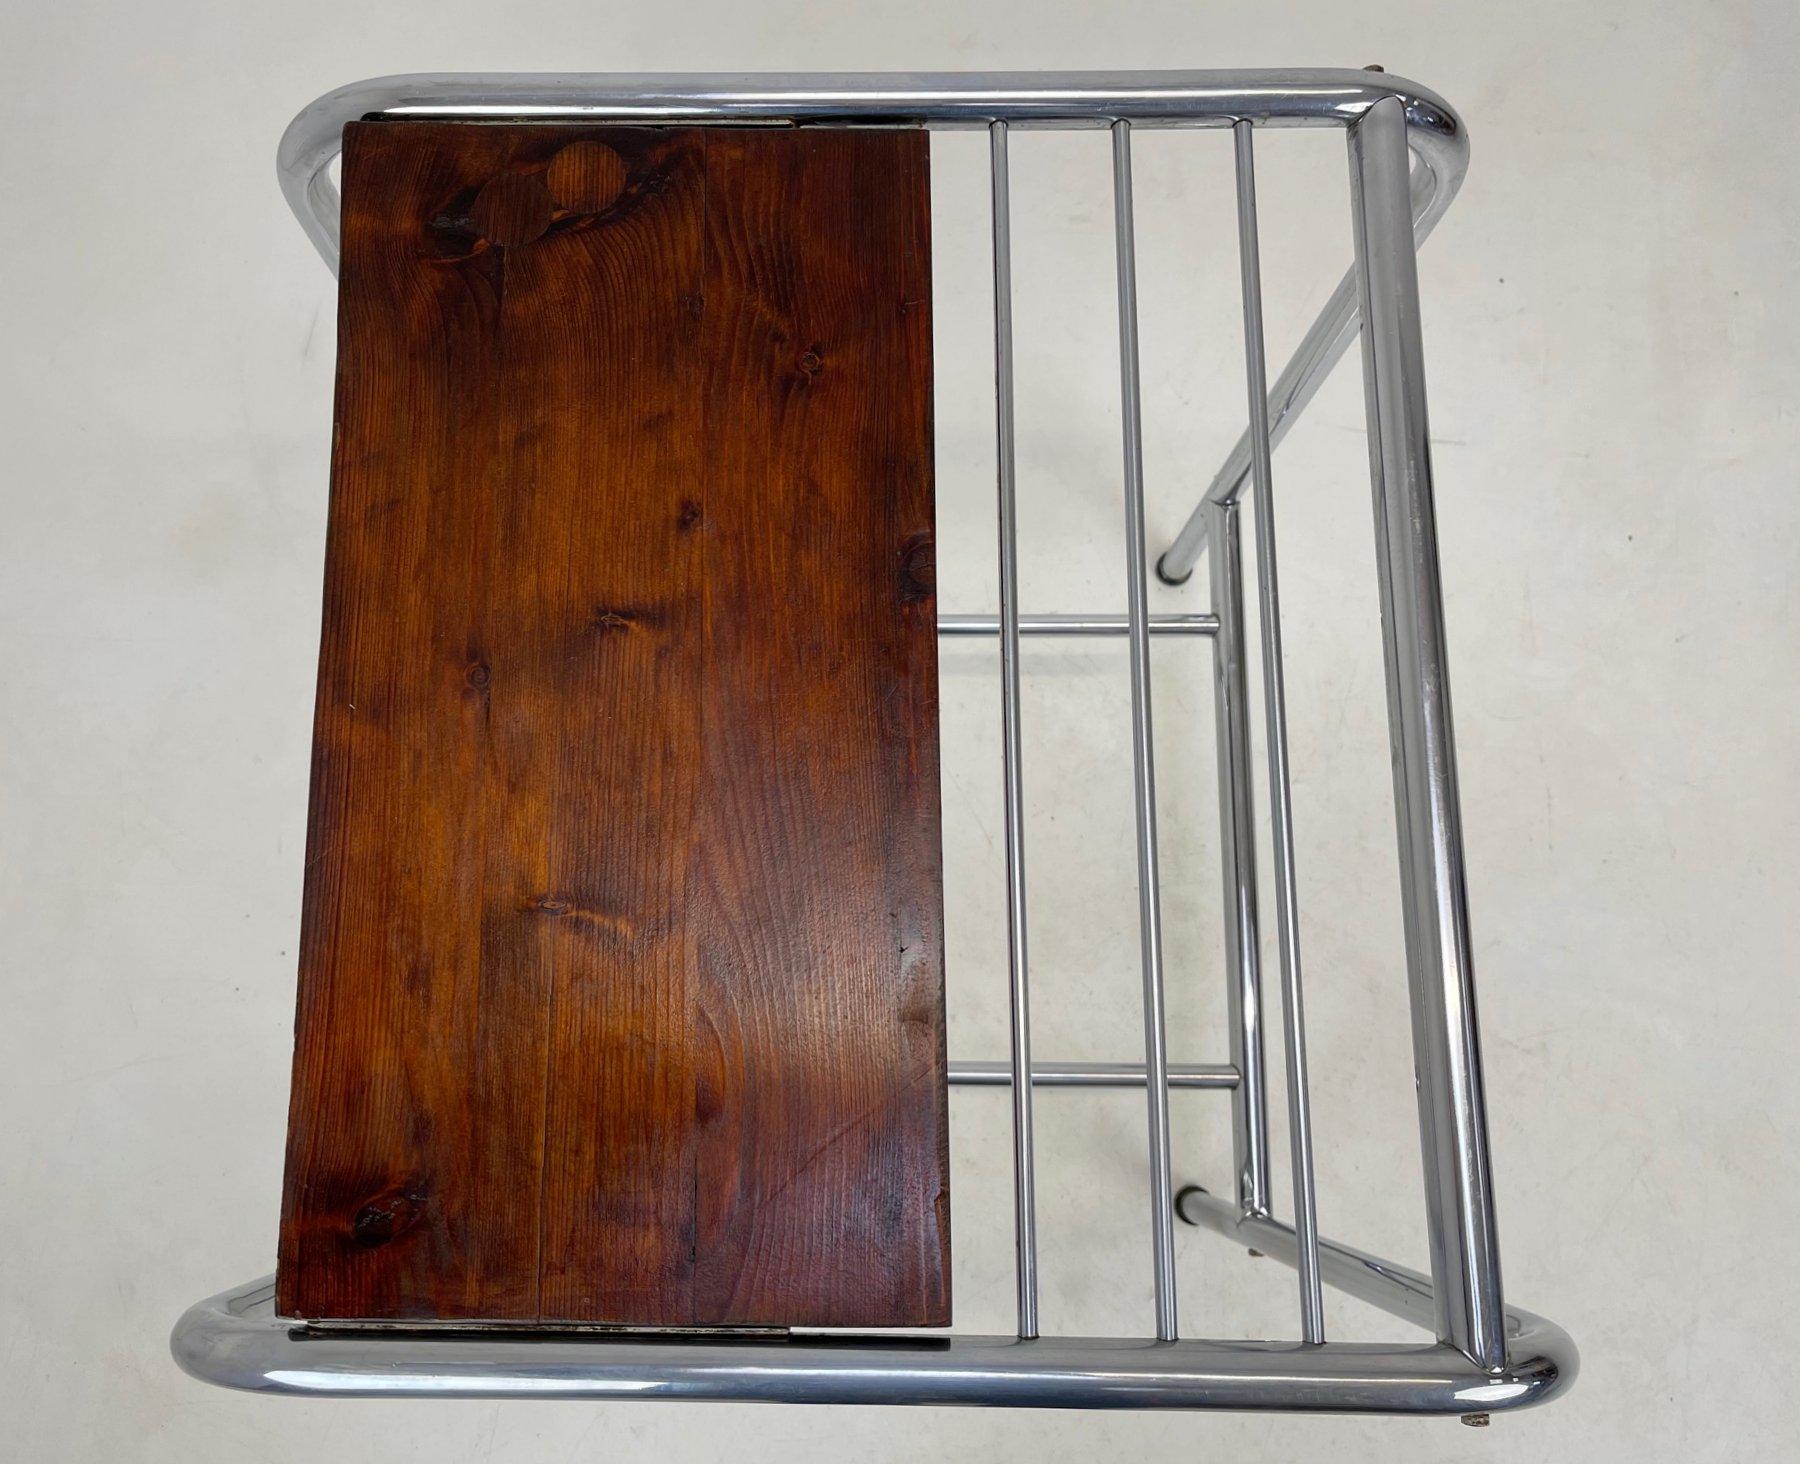 Functionalist Chrome & Wood Table, 1950's For Sale 2